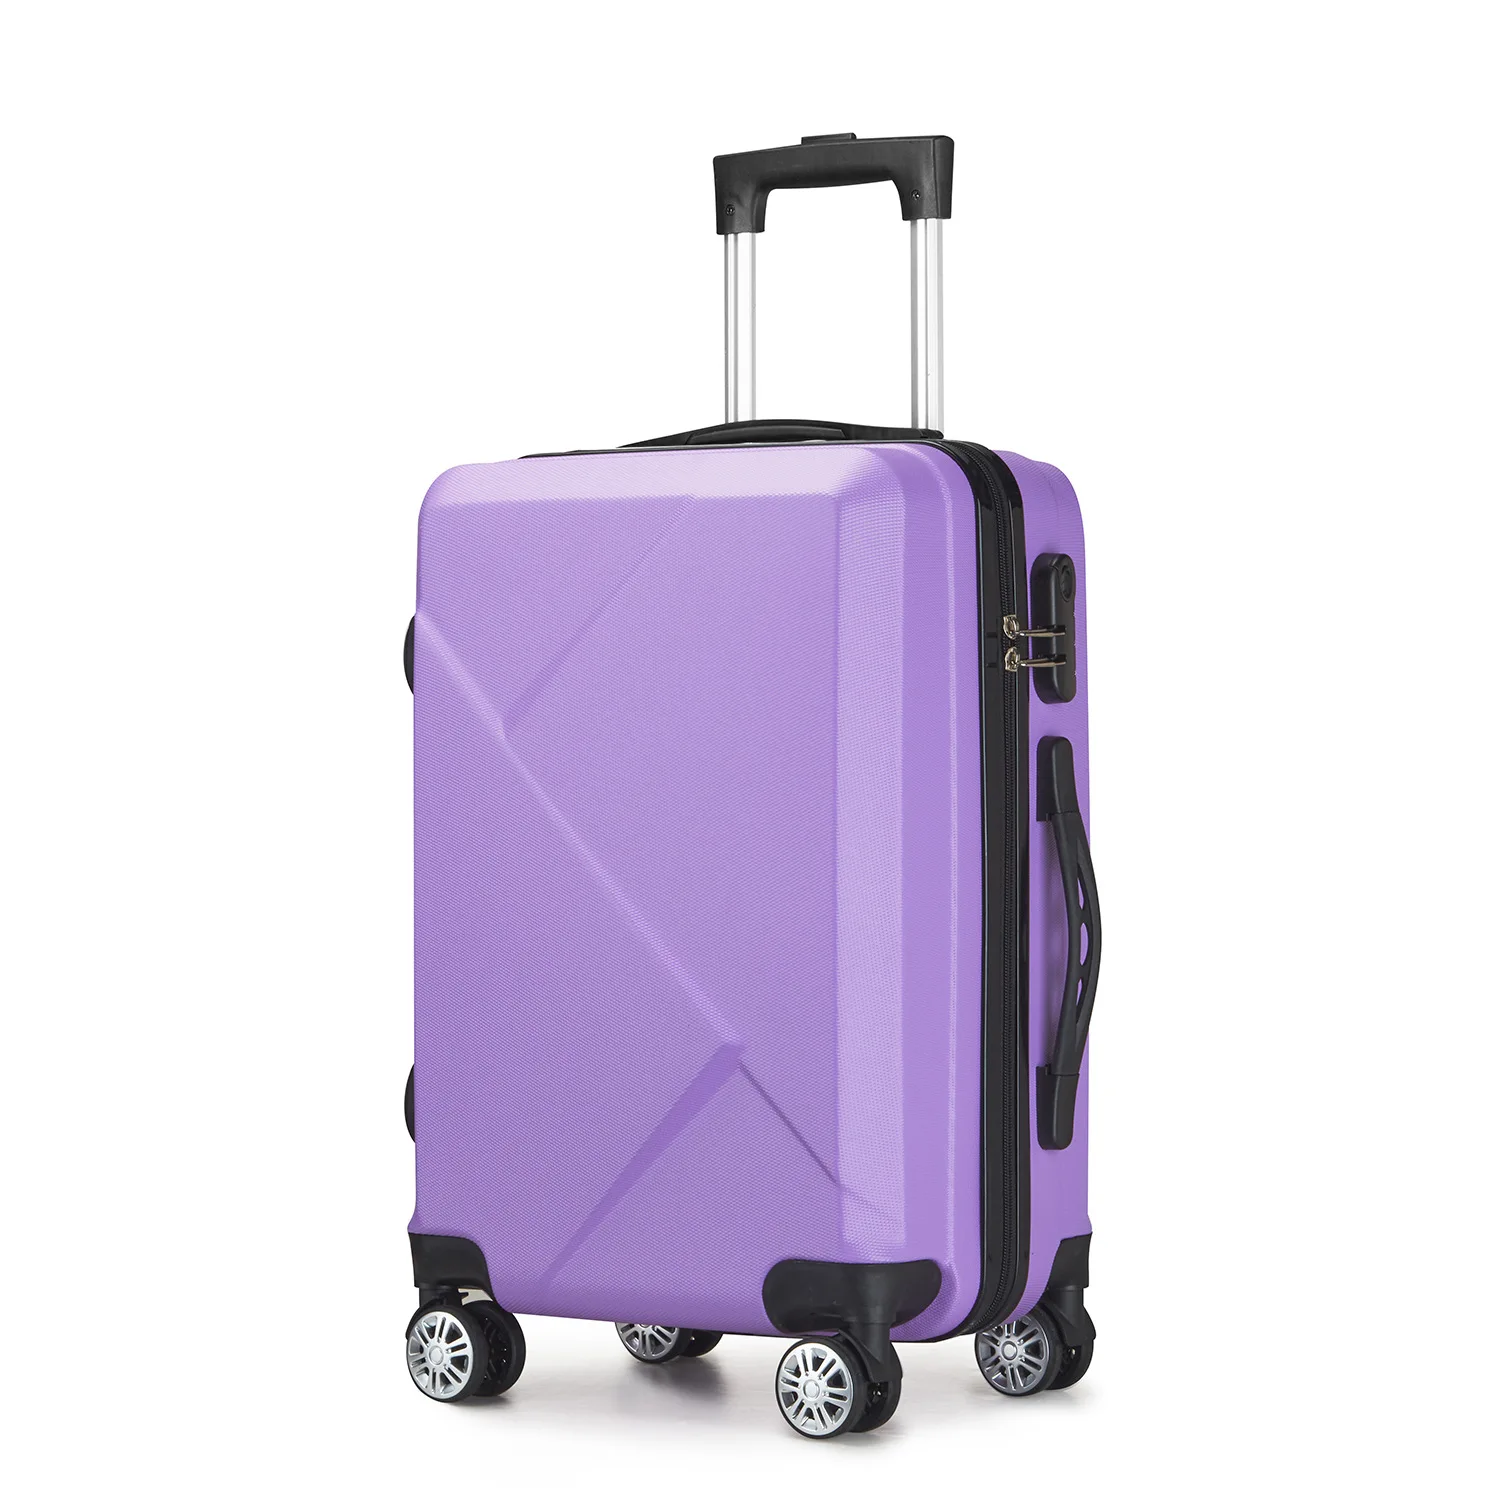 

Wholesale Good Quality Abs Material Airplane Carry-on Luggage Wheeled Hard Shell Trolley Case For Travel, Black,silver,purple,blue,rose gold